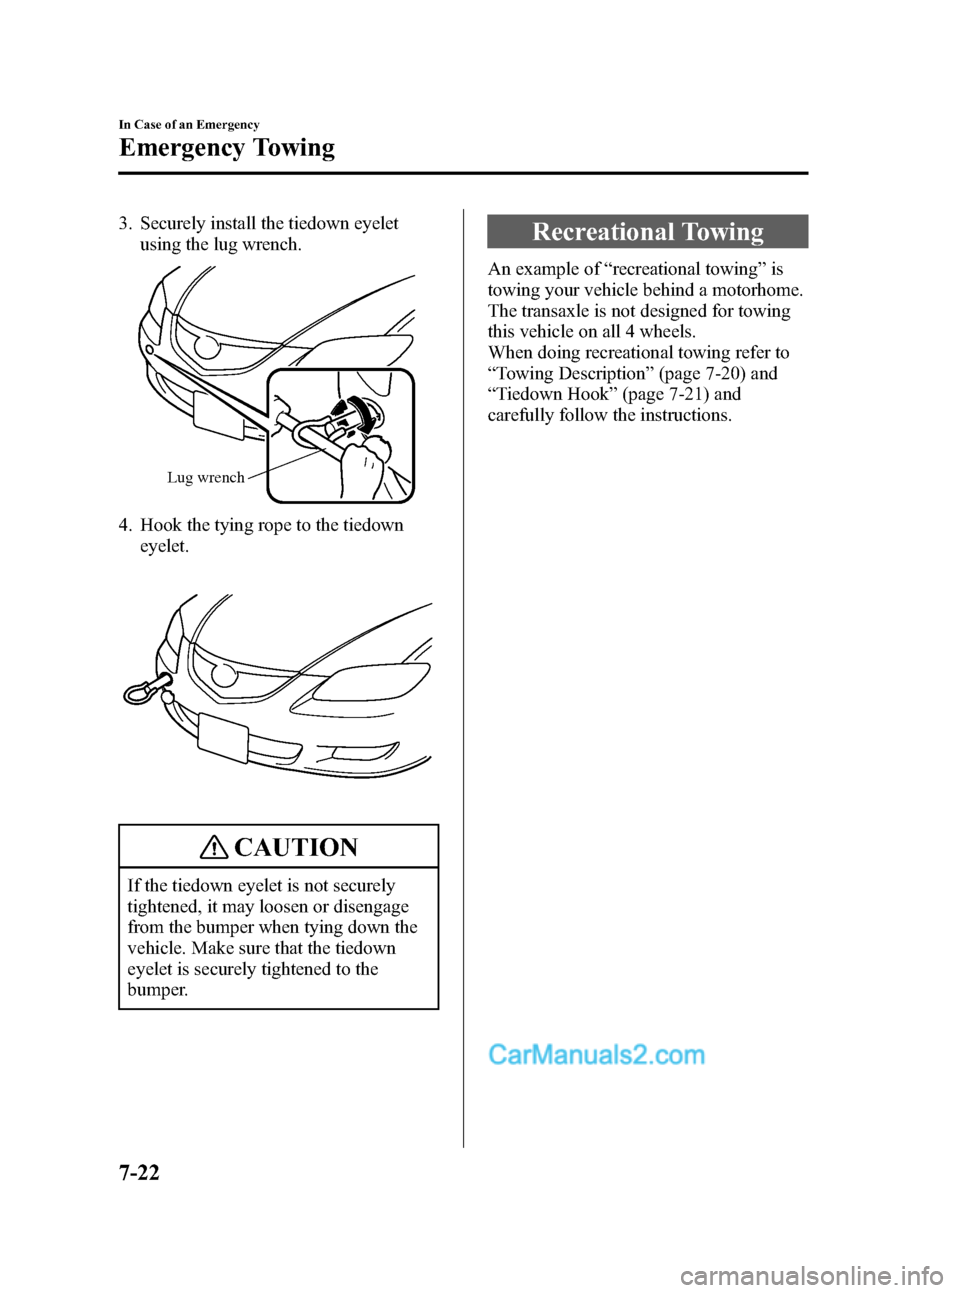 MAZDA MODEL MAZDASPEED 3 2007  Owners Manual (in English) Black plate (274,1)
3. Securely install the tiedown eyelet
using the lug wrench.
Lug wrench
4. Hook the tying rope to the tiedown
eyelet.
CAUTION
If the tiedown eyelet is not securely
tightened, it ma